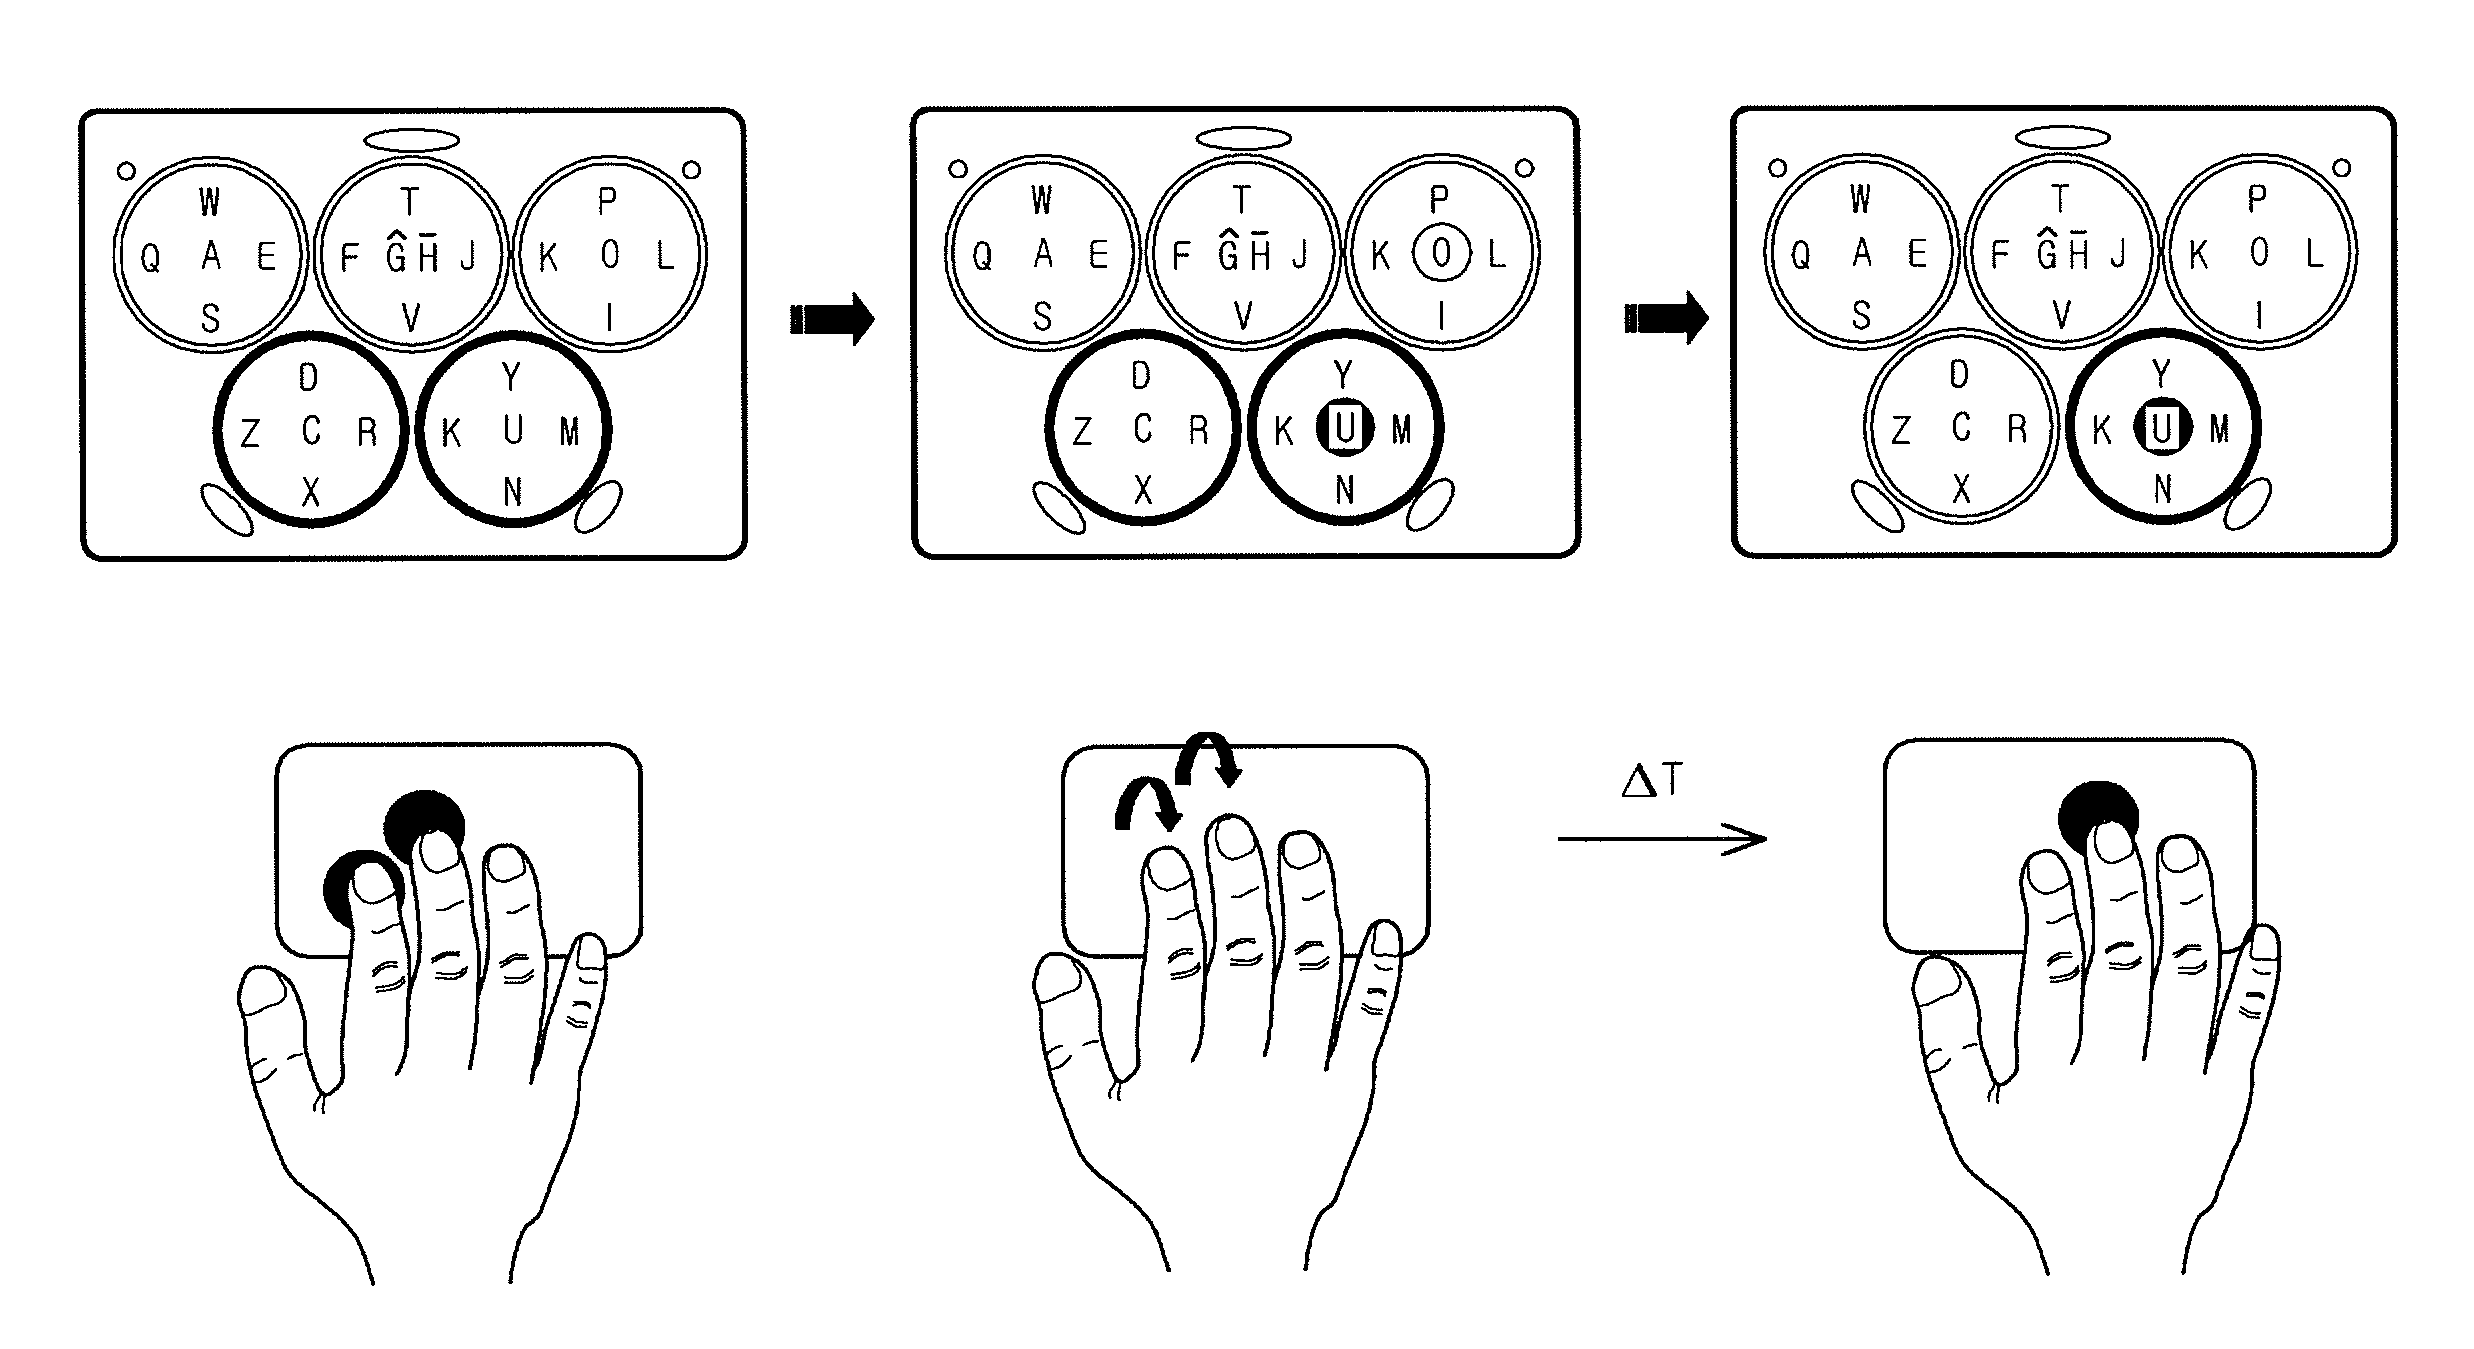 Multi-touch character input method